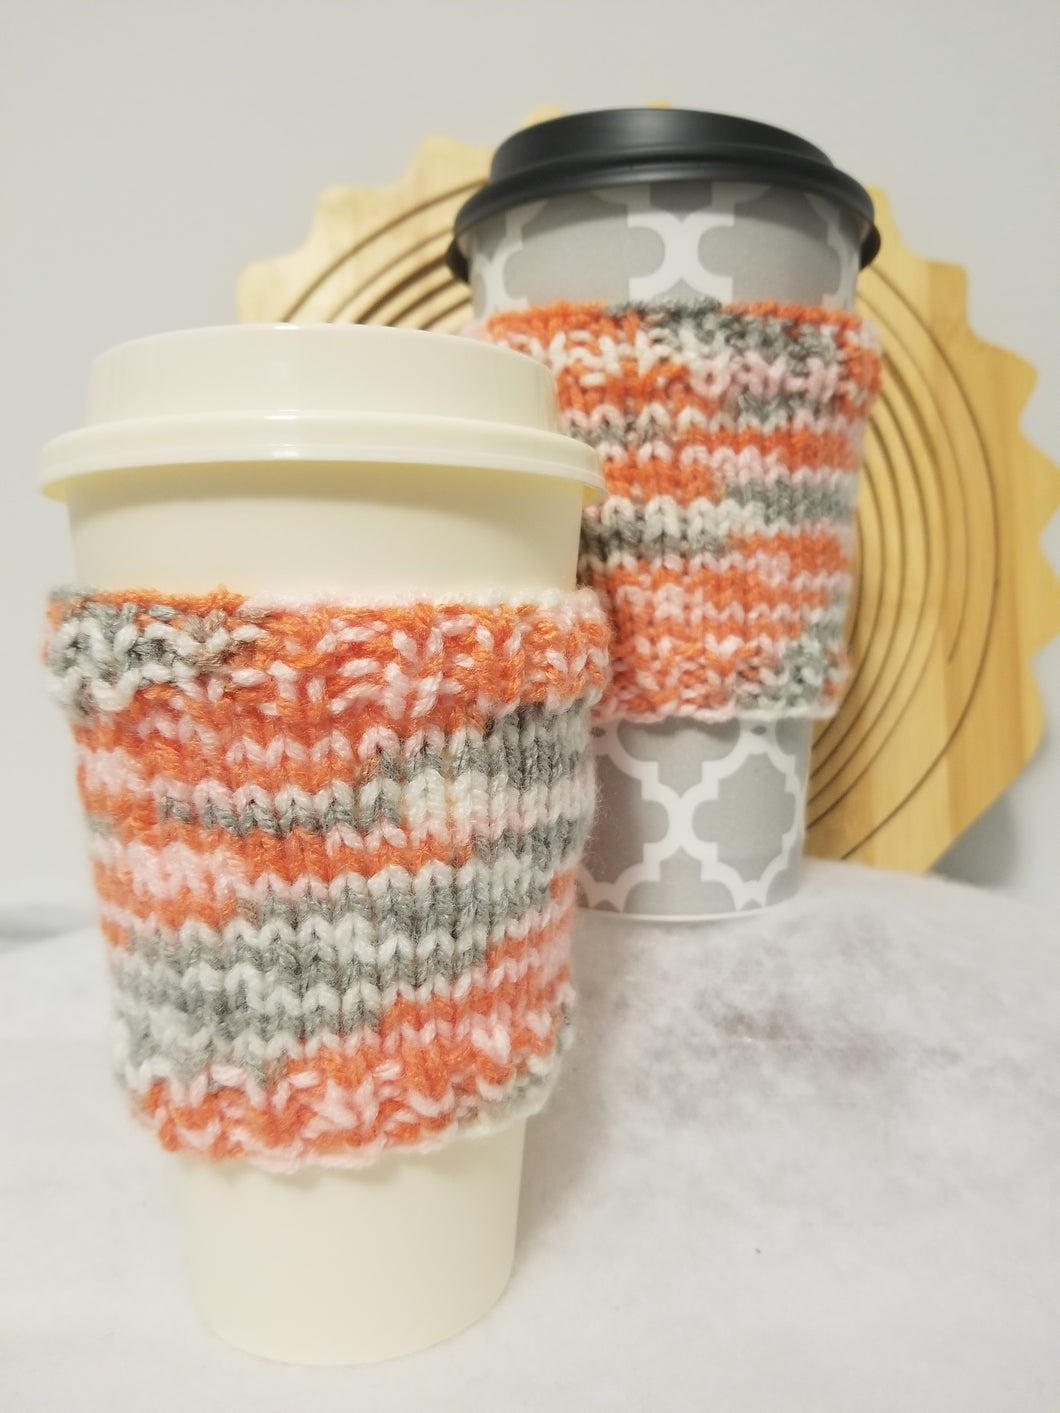 Cup Cuddlers fit 12, 16, 20, & 24 oz cups from your favorite shop, as well as reusable cups. They replace the disposable cardboard sleeve on hot beverages and keep your hands free from moisture and stickiness on cold beverages. Keep several in your car to be ready for that morning drive-thru! Great as gifts; tuck a gift card to your favorite shop inside! Cup Cuddlers are $5 each